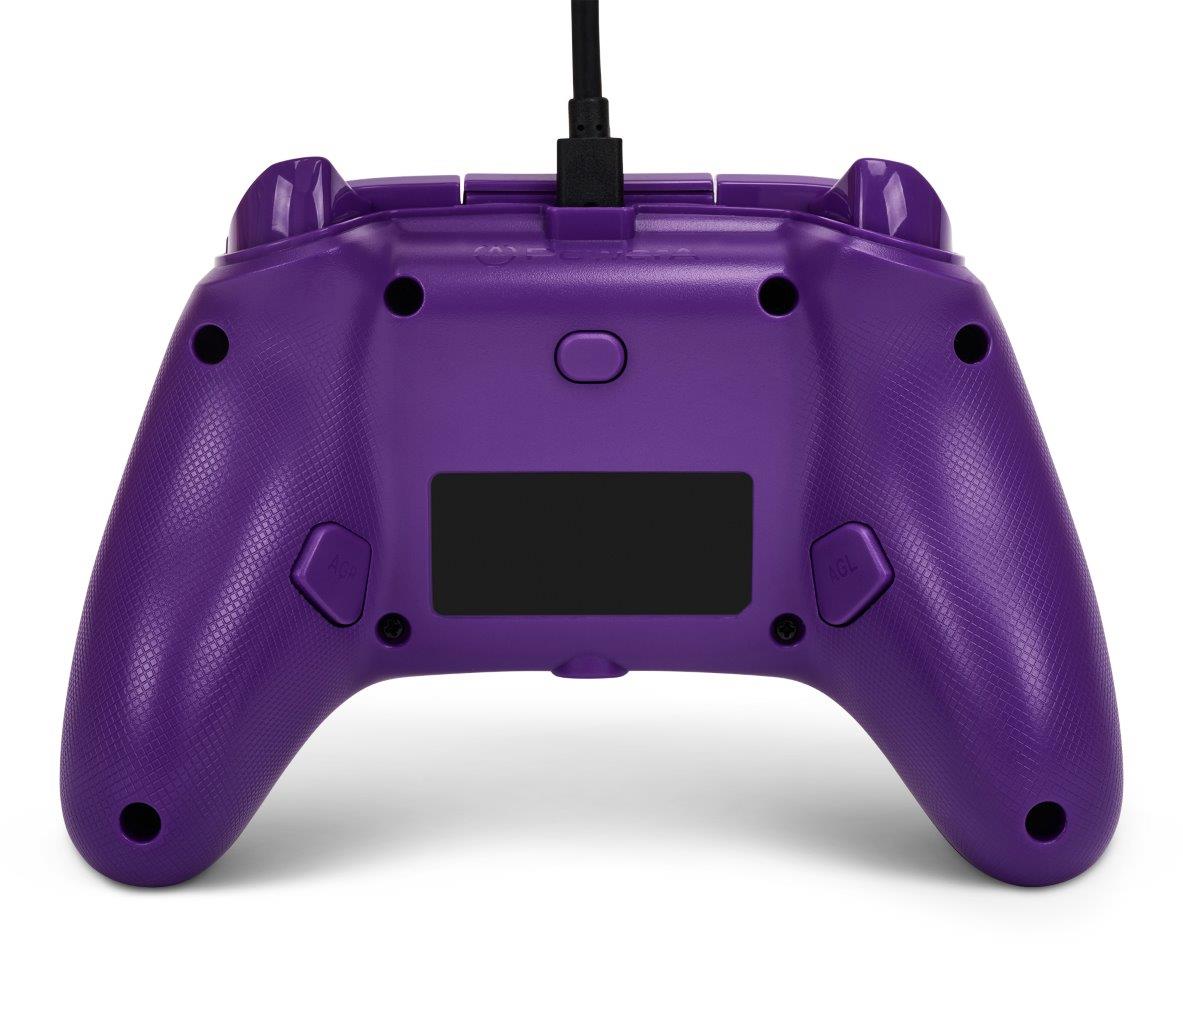 PowerA Enhanced Wired Controller for Xbox Series X|S - Purple Magma